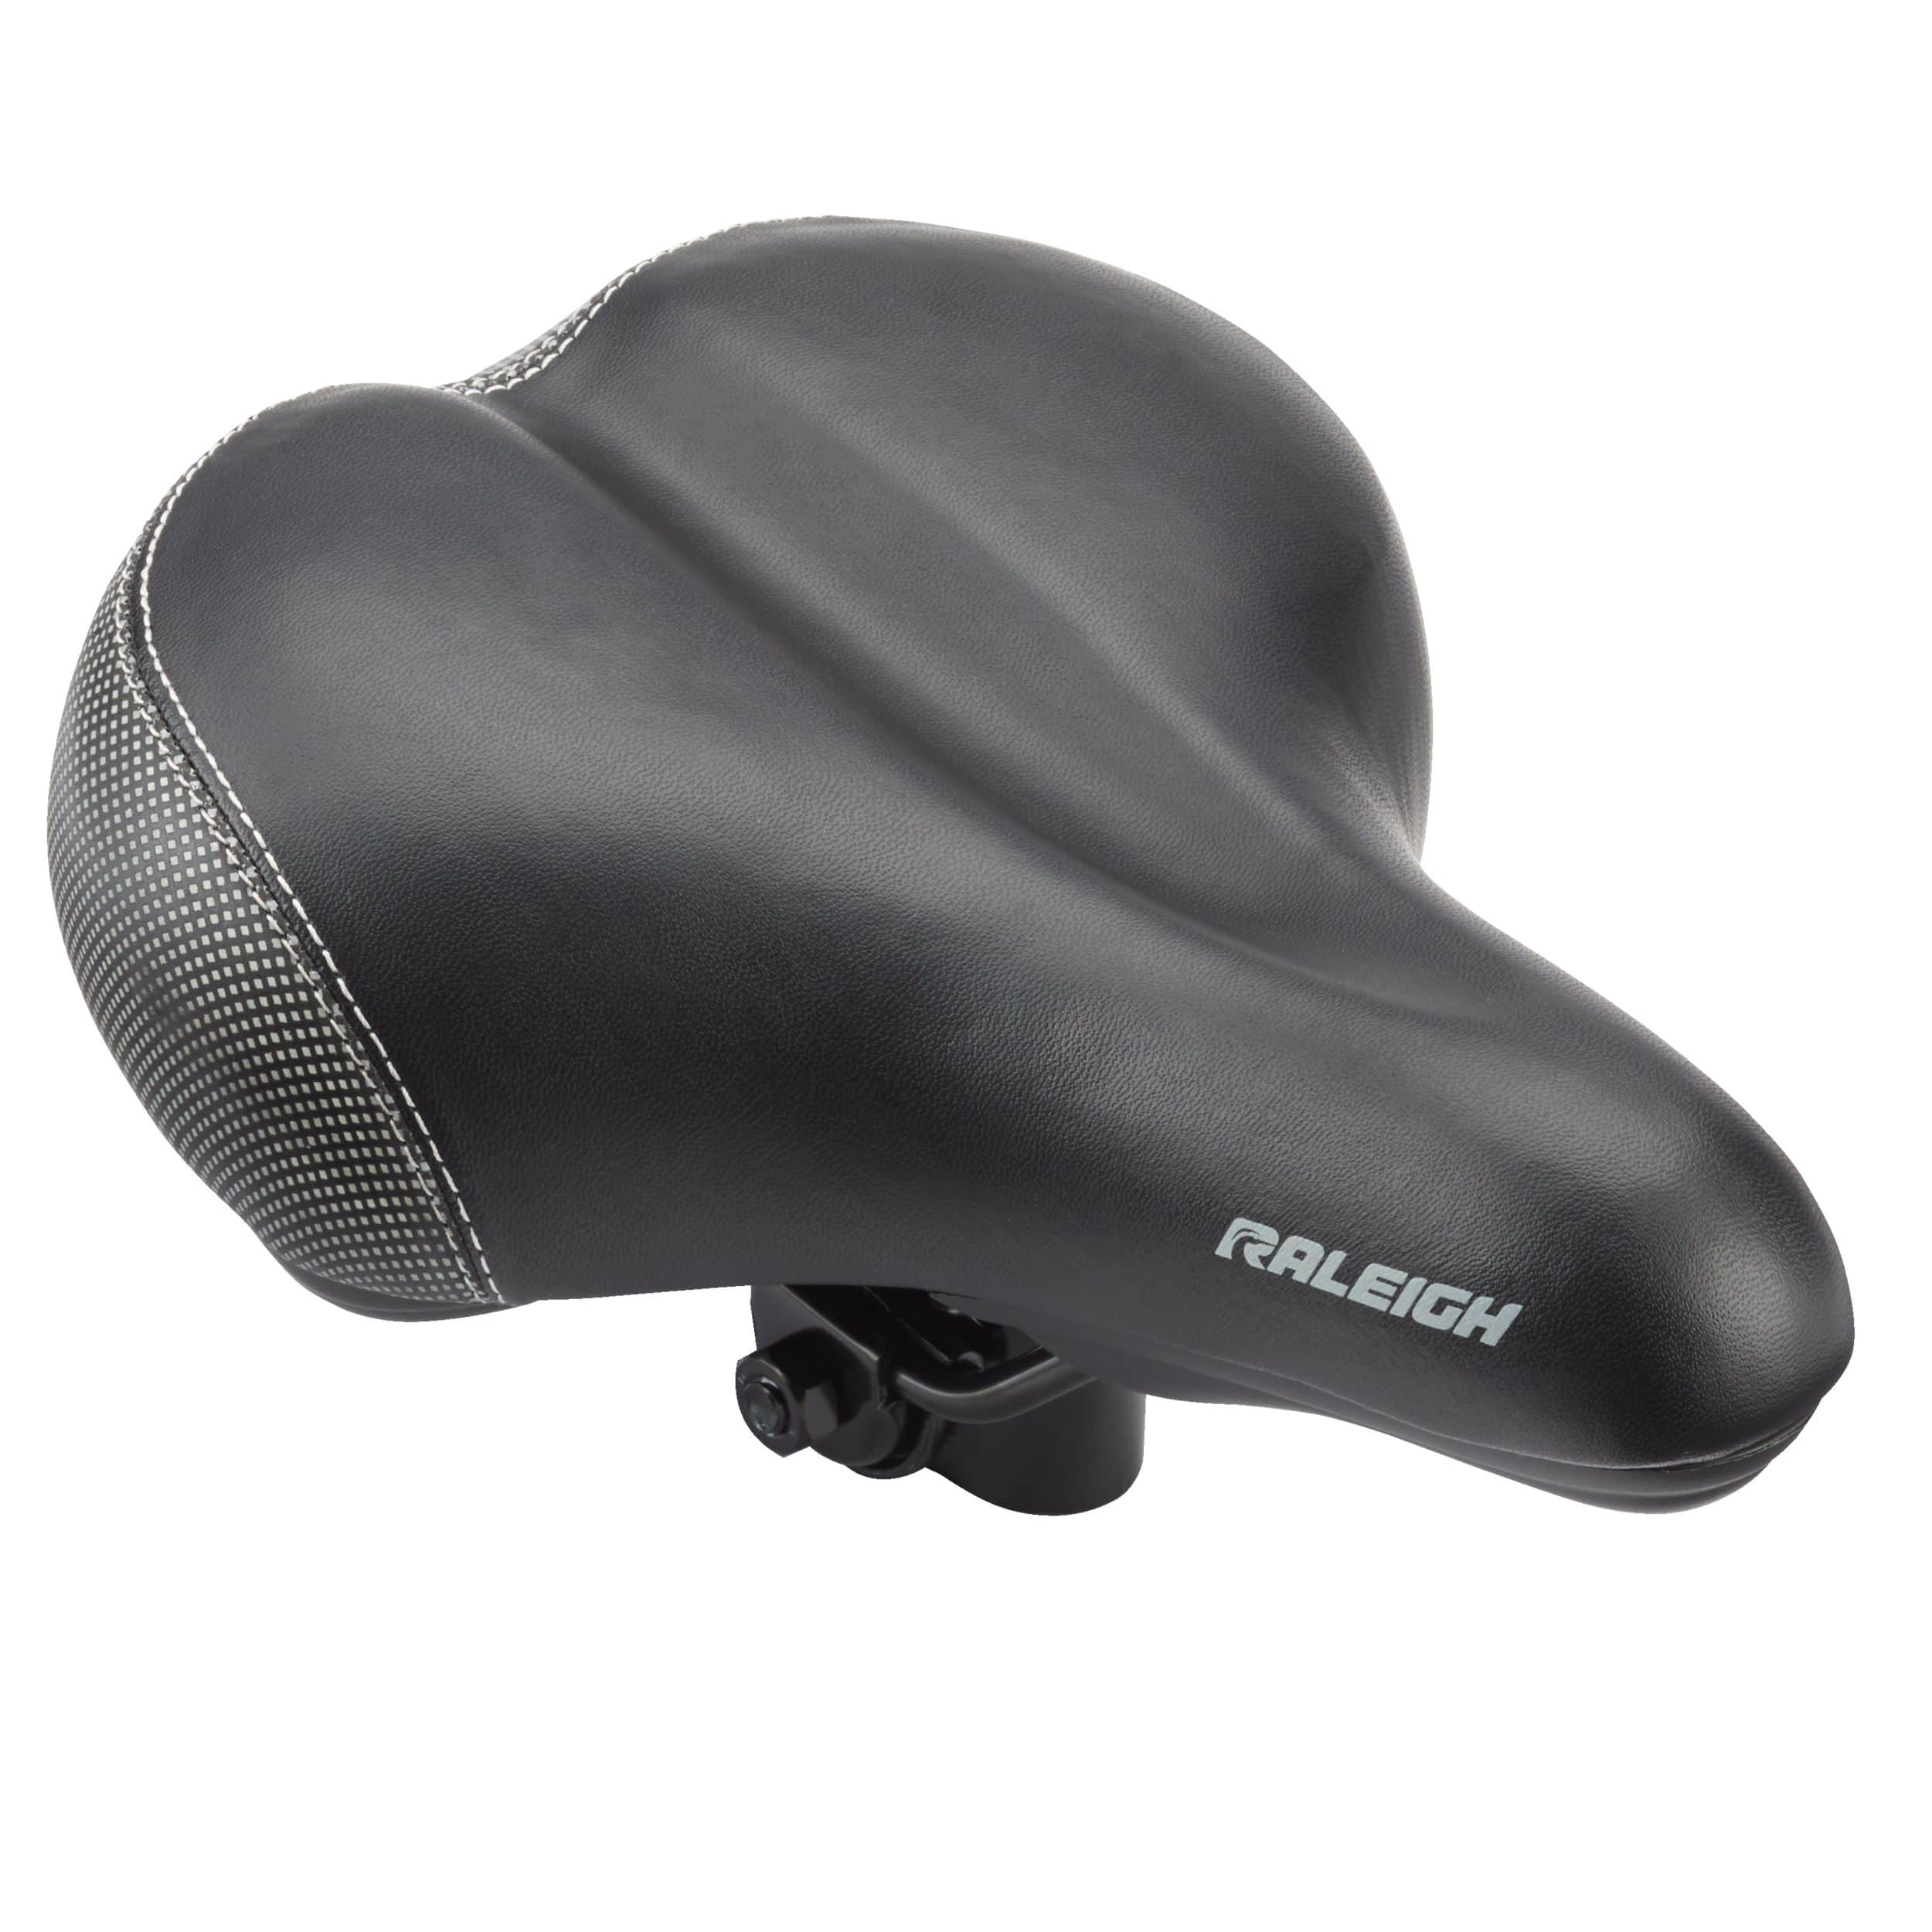 Raleigh High Visibility Bike Saddle with Memory Foam